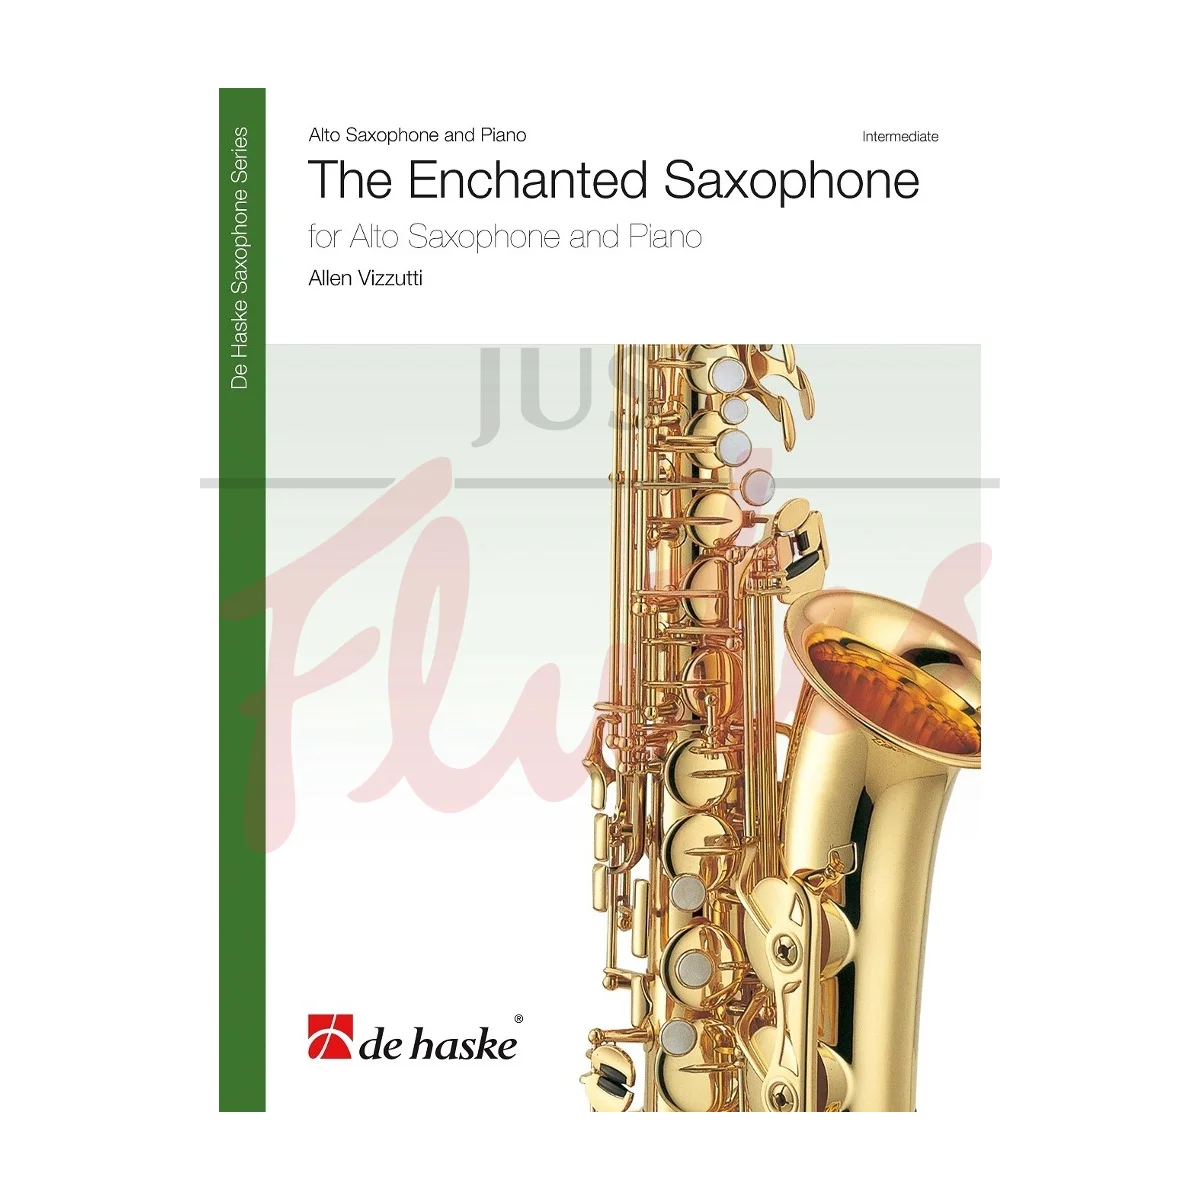 The Enchanted Saxophone for Alto Saxophone and Piano